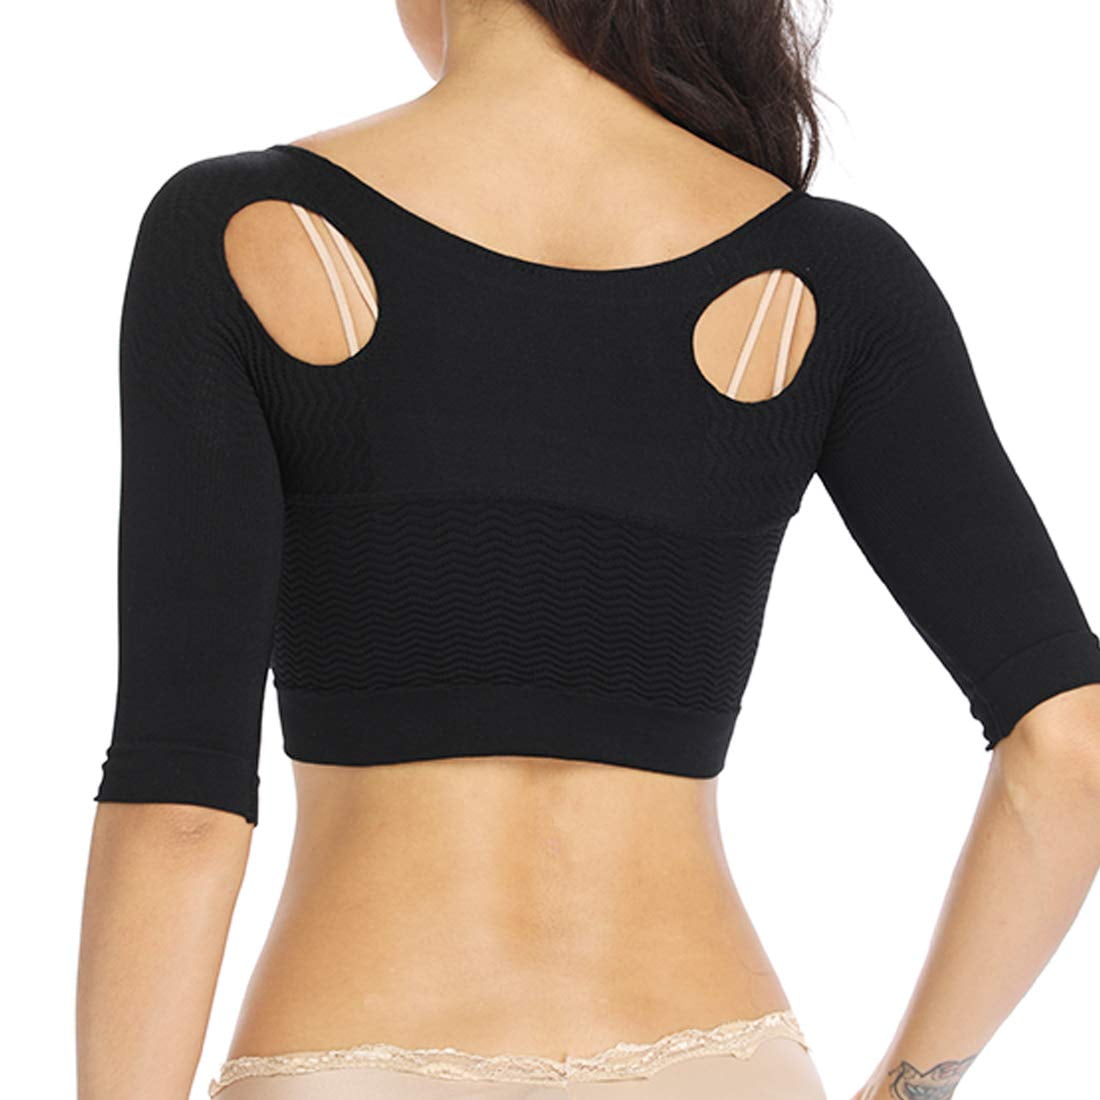 MISS MOLY - Upper Arm Shaper for Women Rib-Knit Compression Crop Top ...